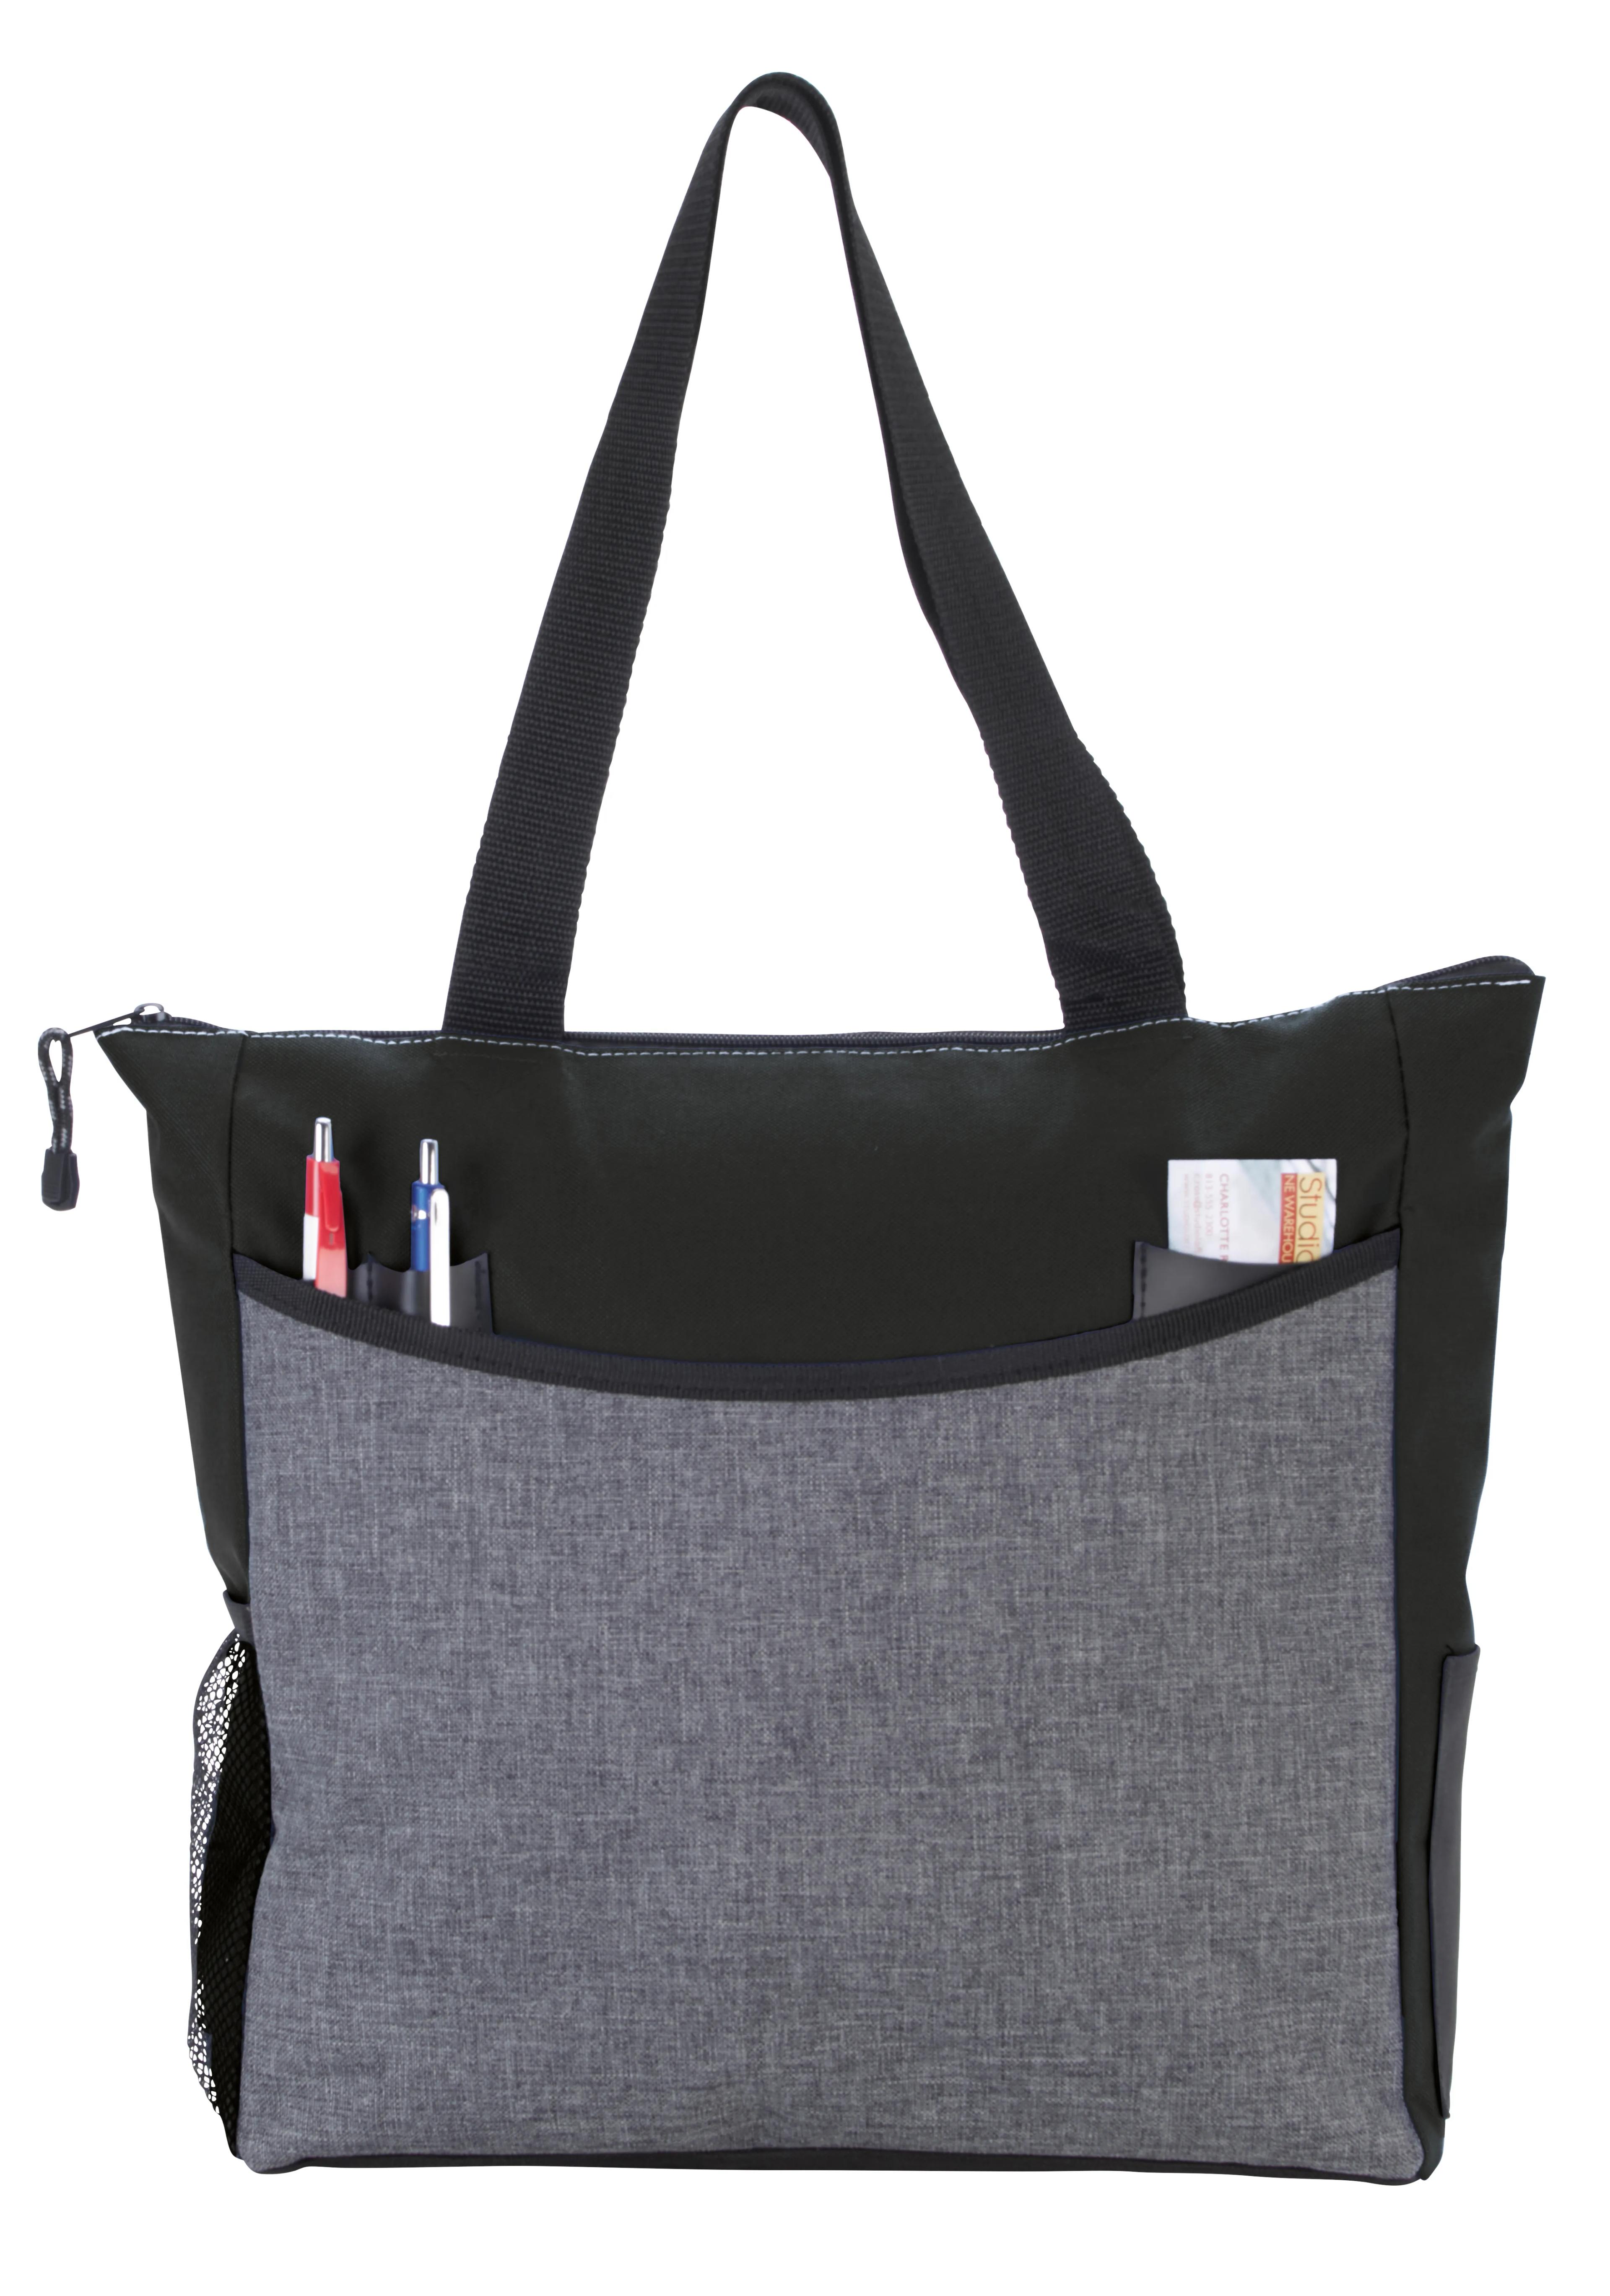 Two-Tone TranSport It Tote 13 of 29